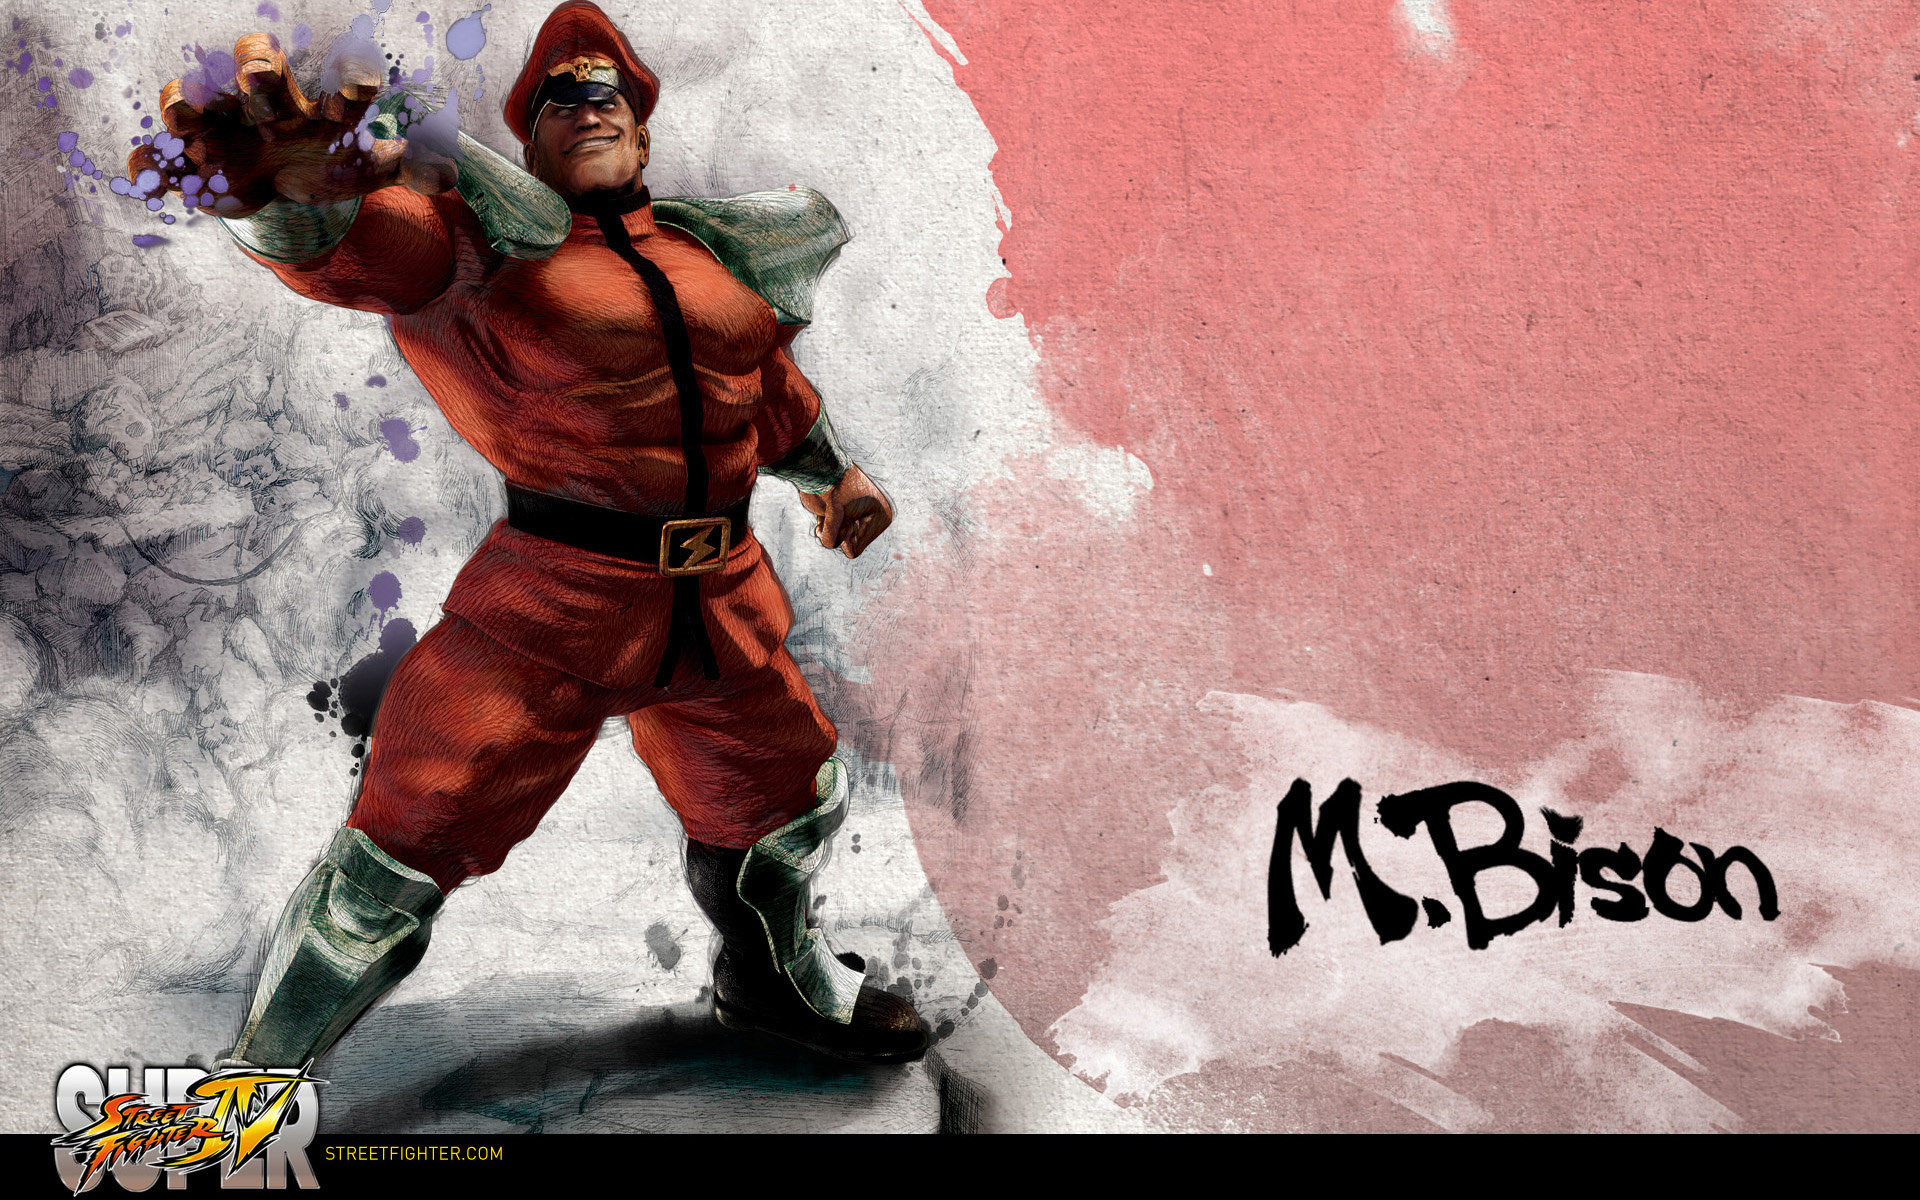 1920x1200 Street Fighter IV Game Wallpapers